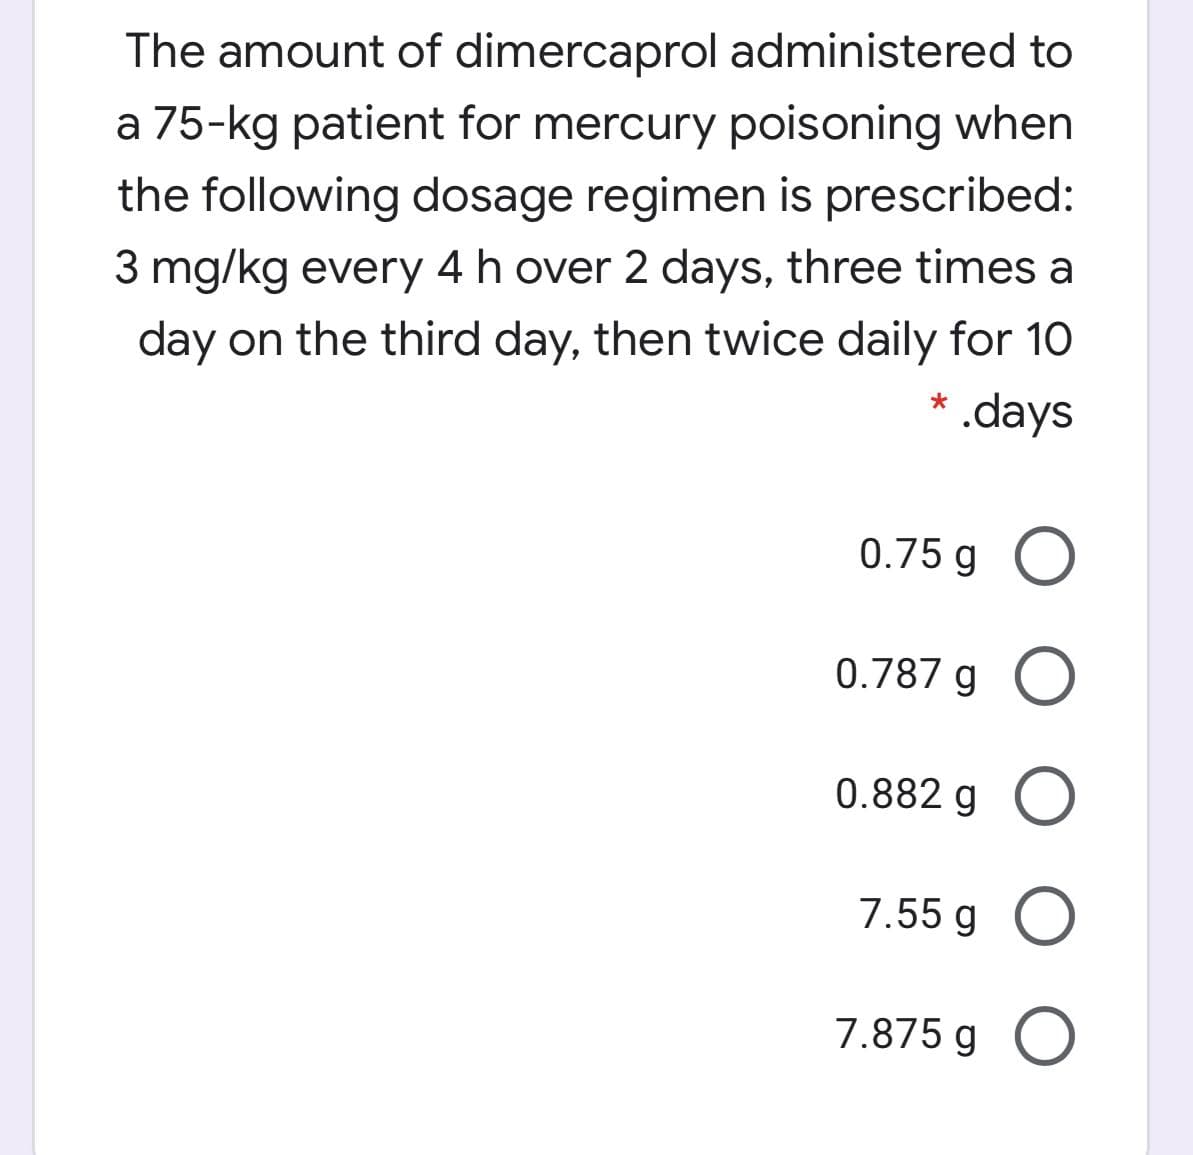 The amount of dimercaprol administered to
a 75-kg patient for mercury poisoning when
the following dosage regimen is prescribed:
3 mg/kg every 4 h over 2 days, three times a
day on the third day, then twice daily for 10
* .days
0.75 g O
0.787 g O
0.882 g O
7.55 g O
7.875 g O
